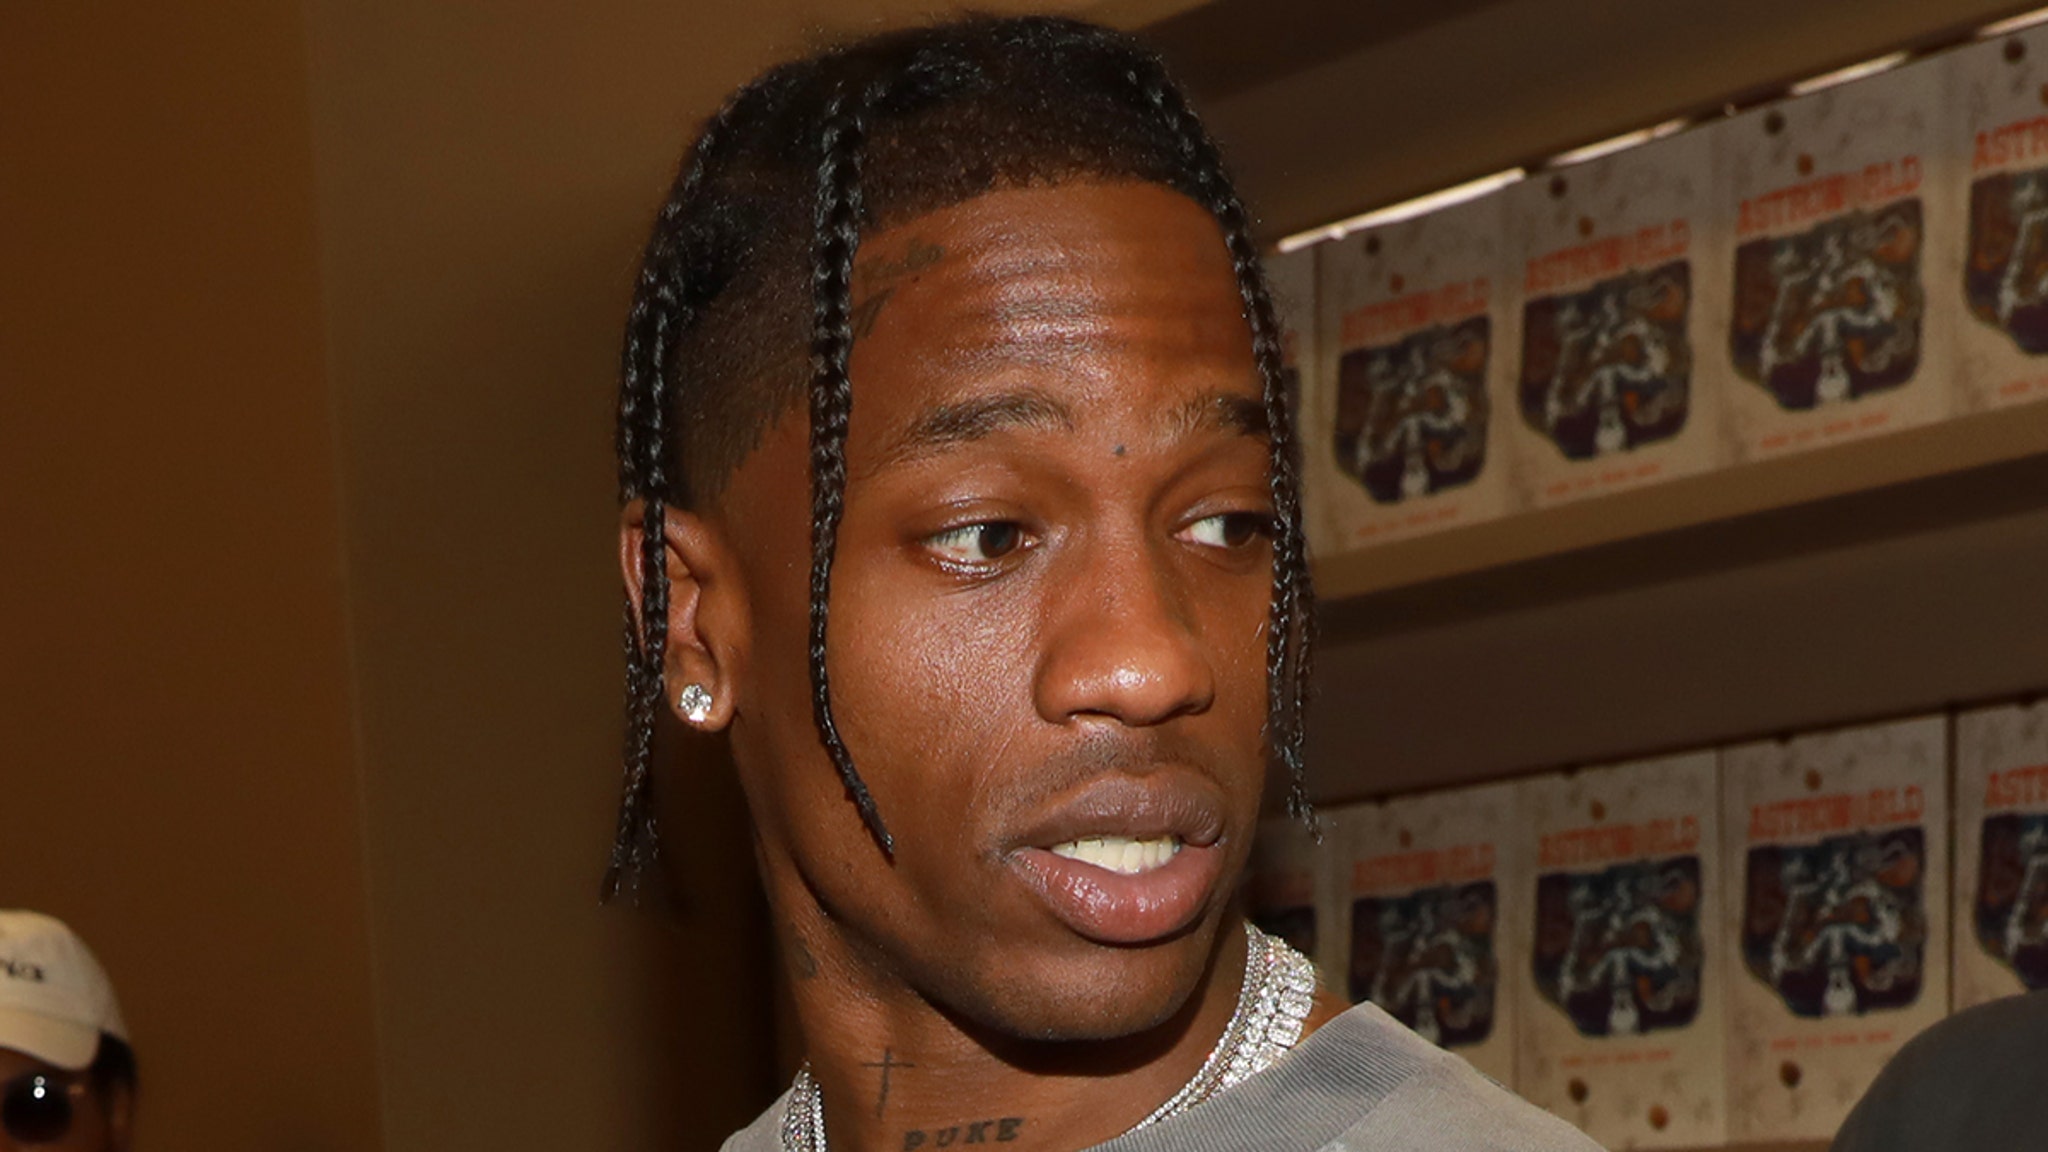 Travis Scott denies rumor he hung out with ex-girlfriend, 'I don't know that person'